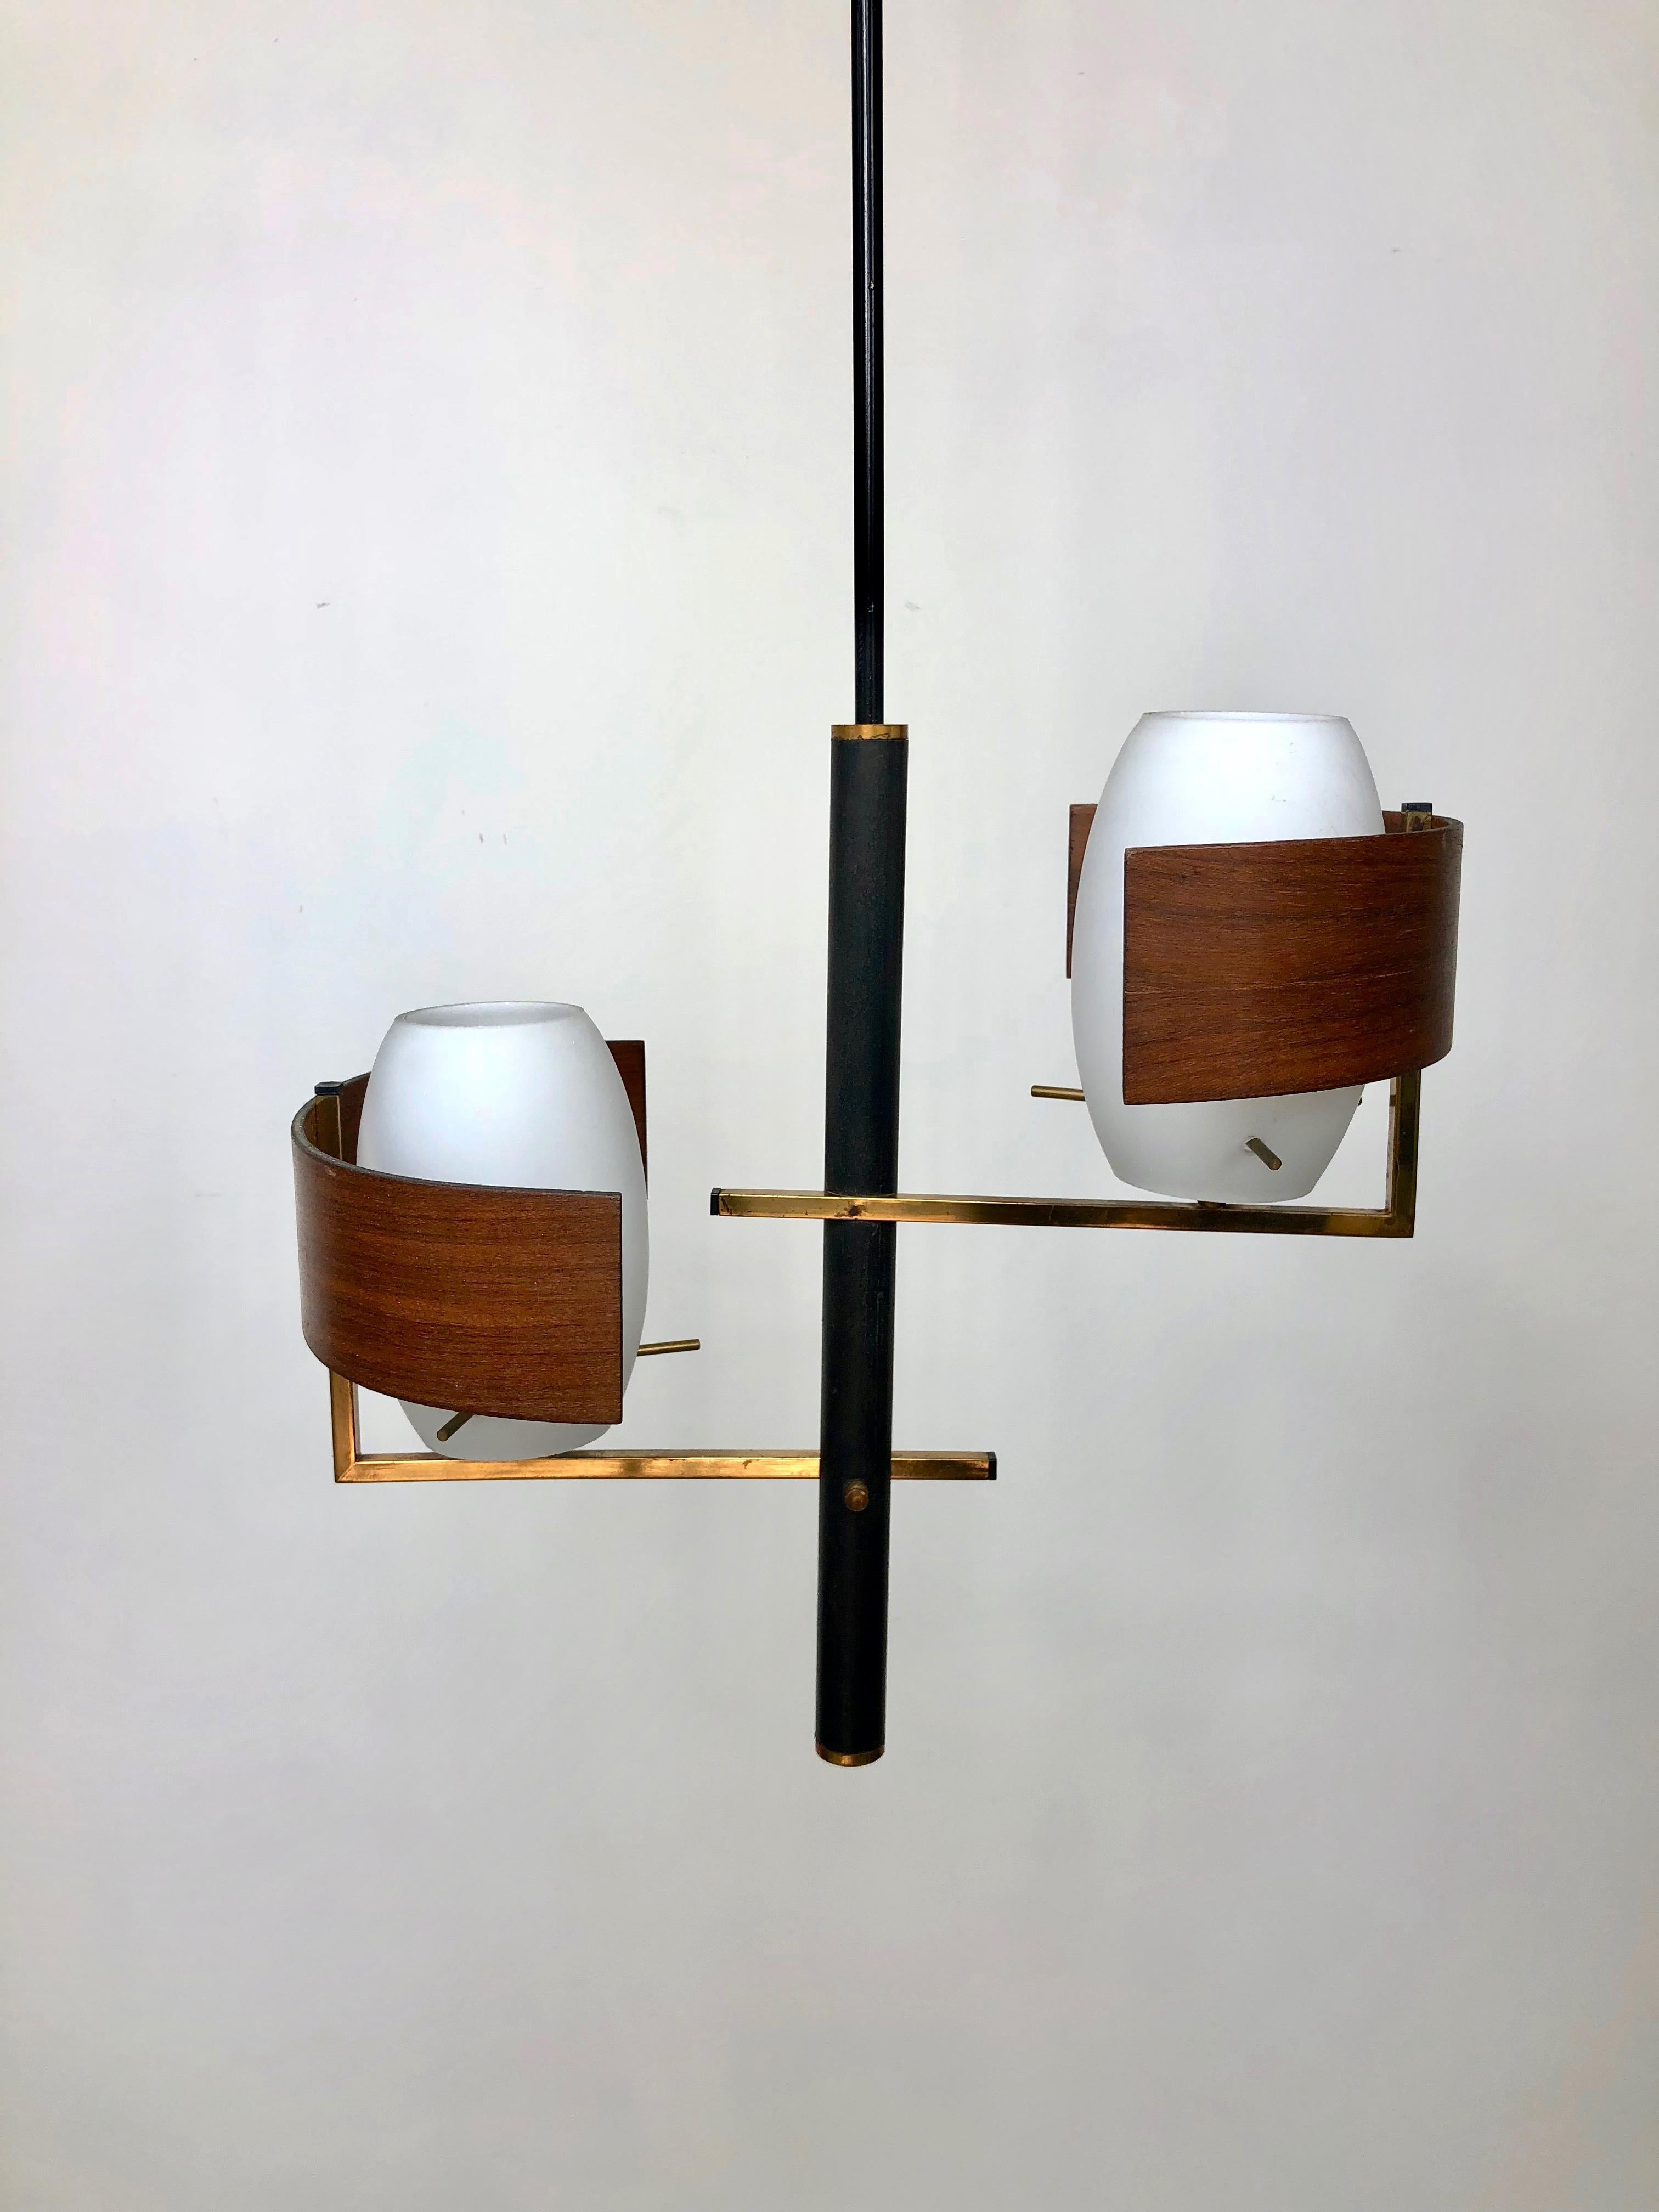 Italian modernist chandelier with 2 white opaline glass shades embellished with brass and teak frame and details. Typical modernist piece of the 1960s.
.  